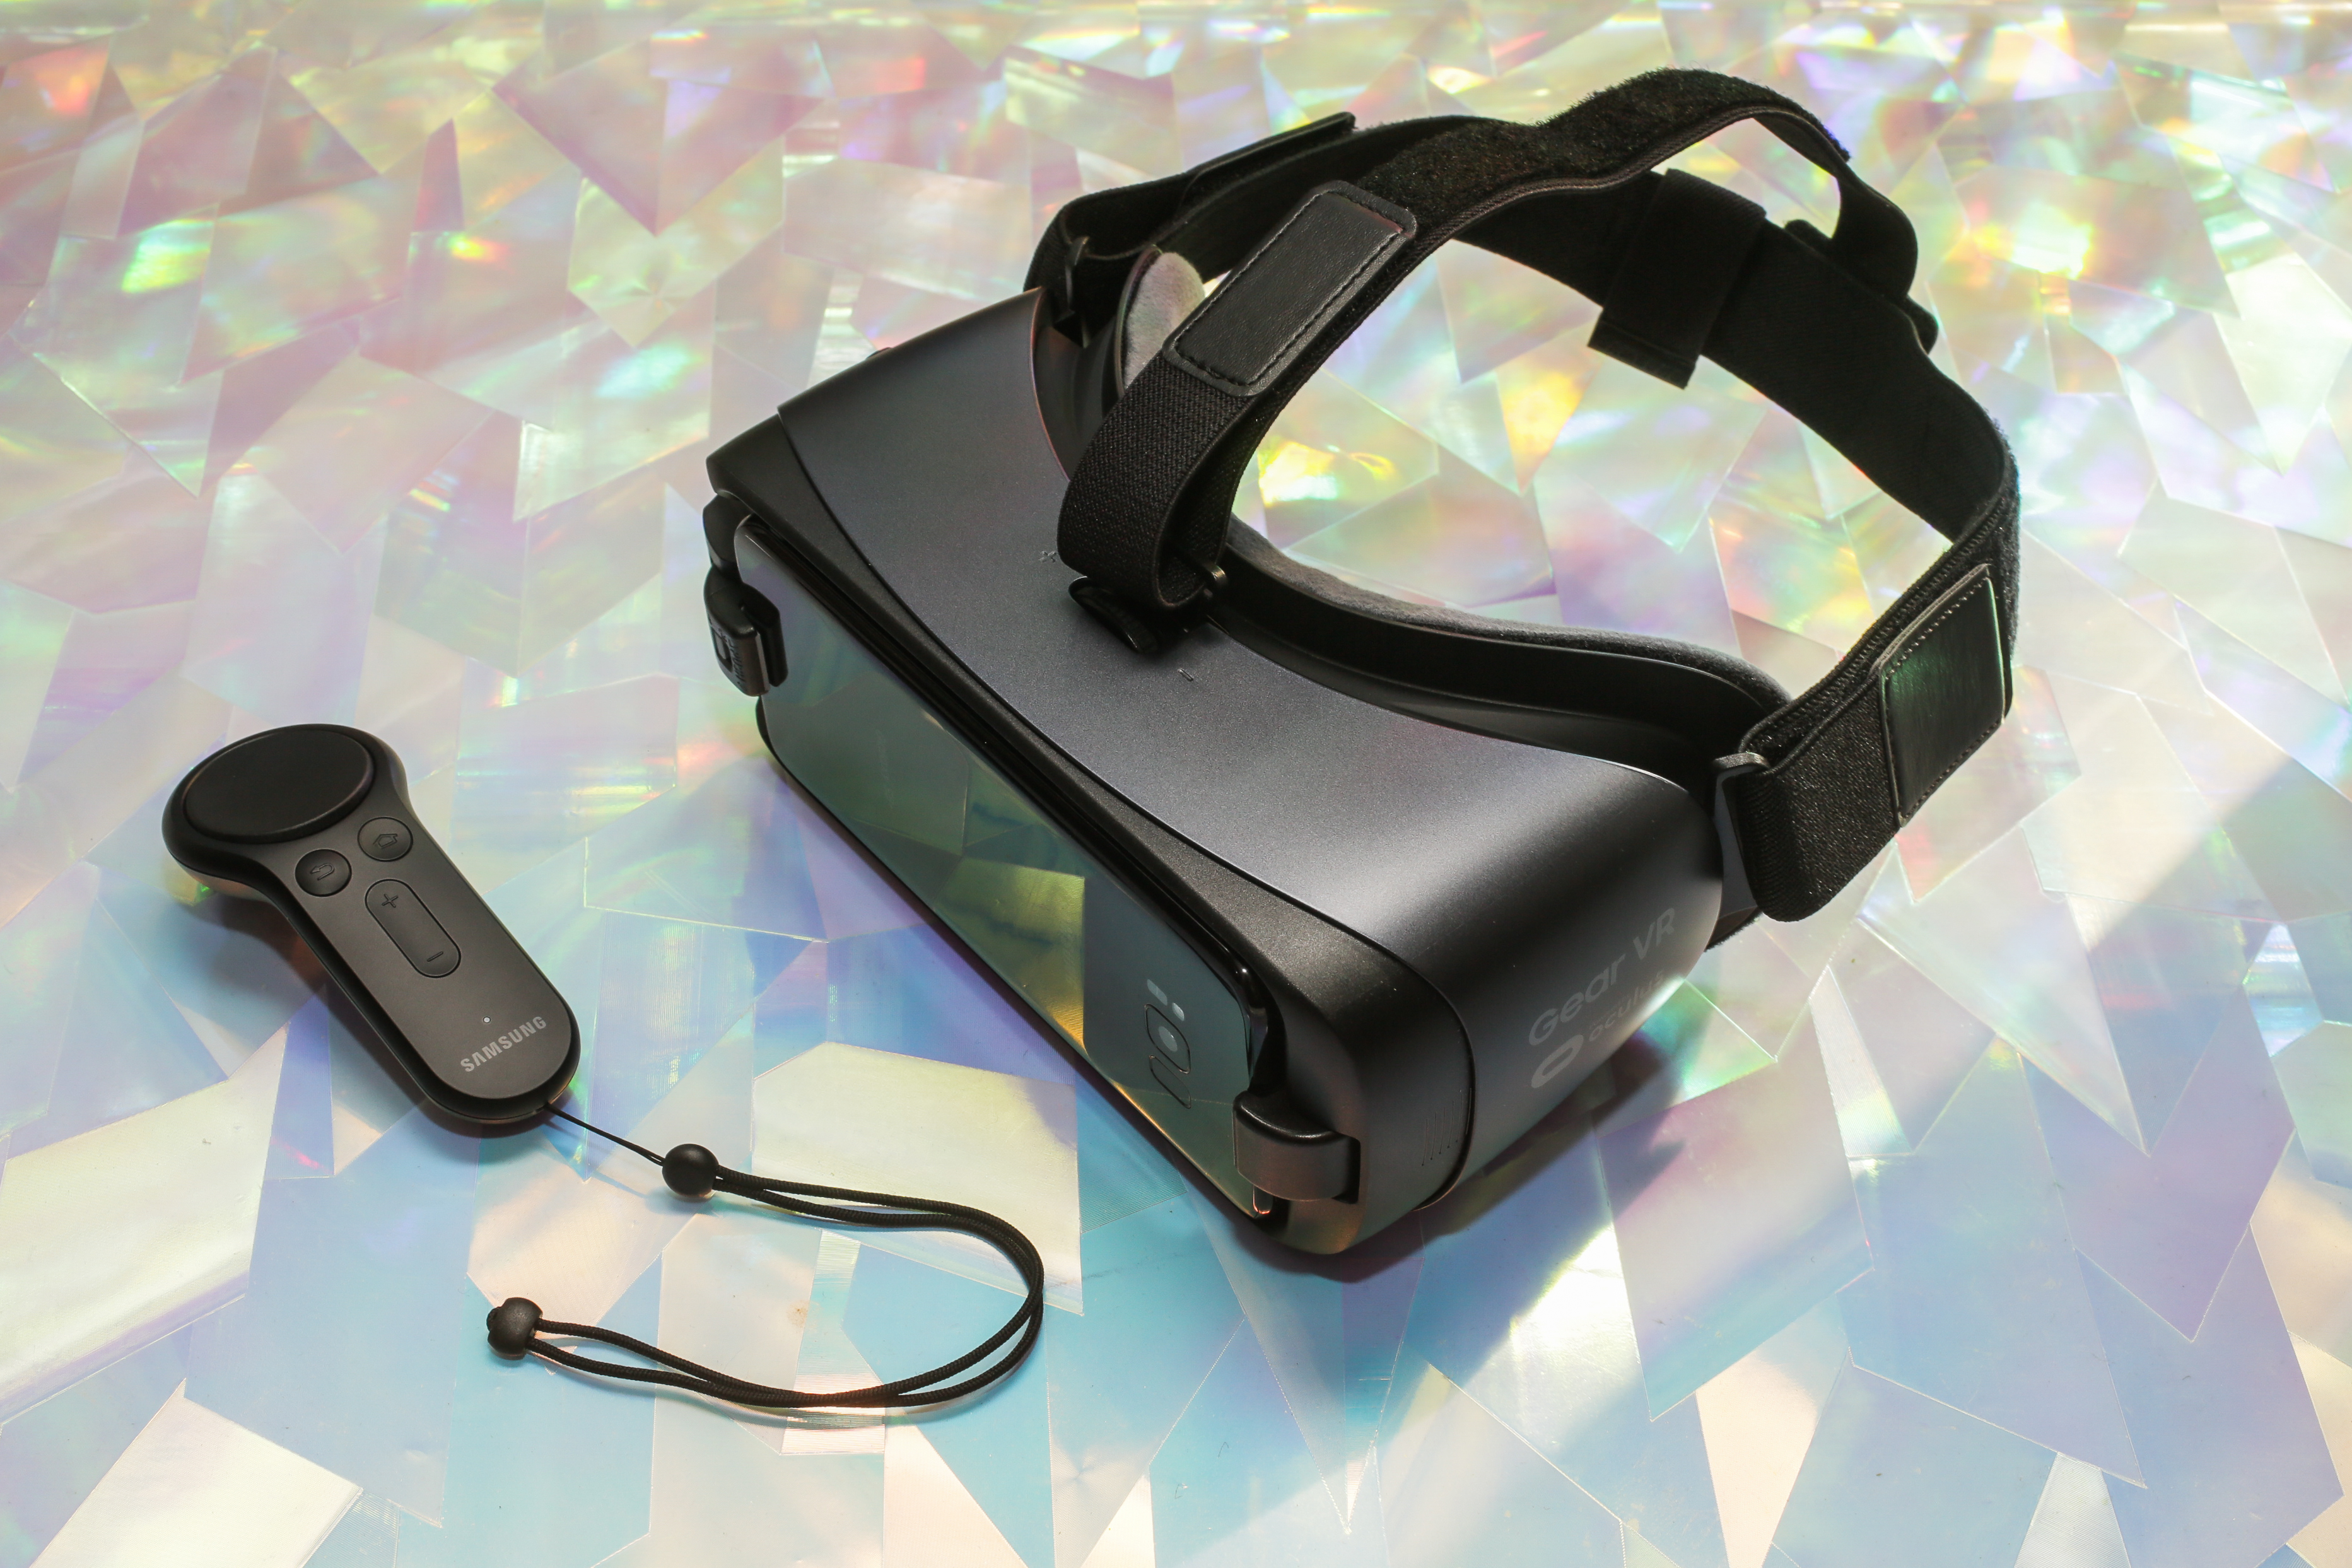 Demon italic accelerator Samsung Gear VR (2017) review: Samsung Gear VR's best feature isn't the  Galaxy S8, it's the controller - CNET